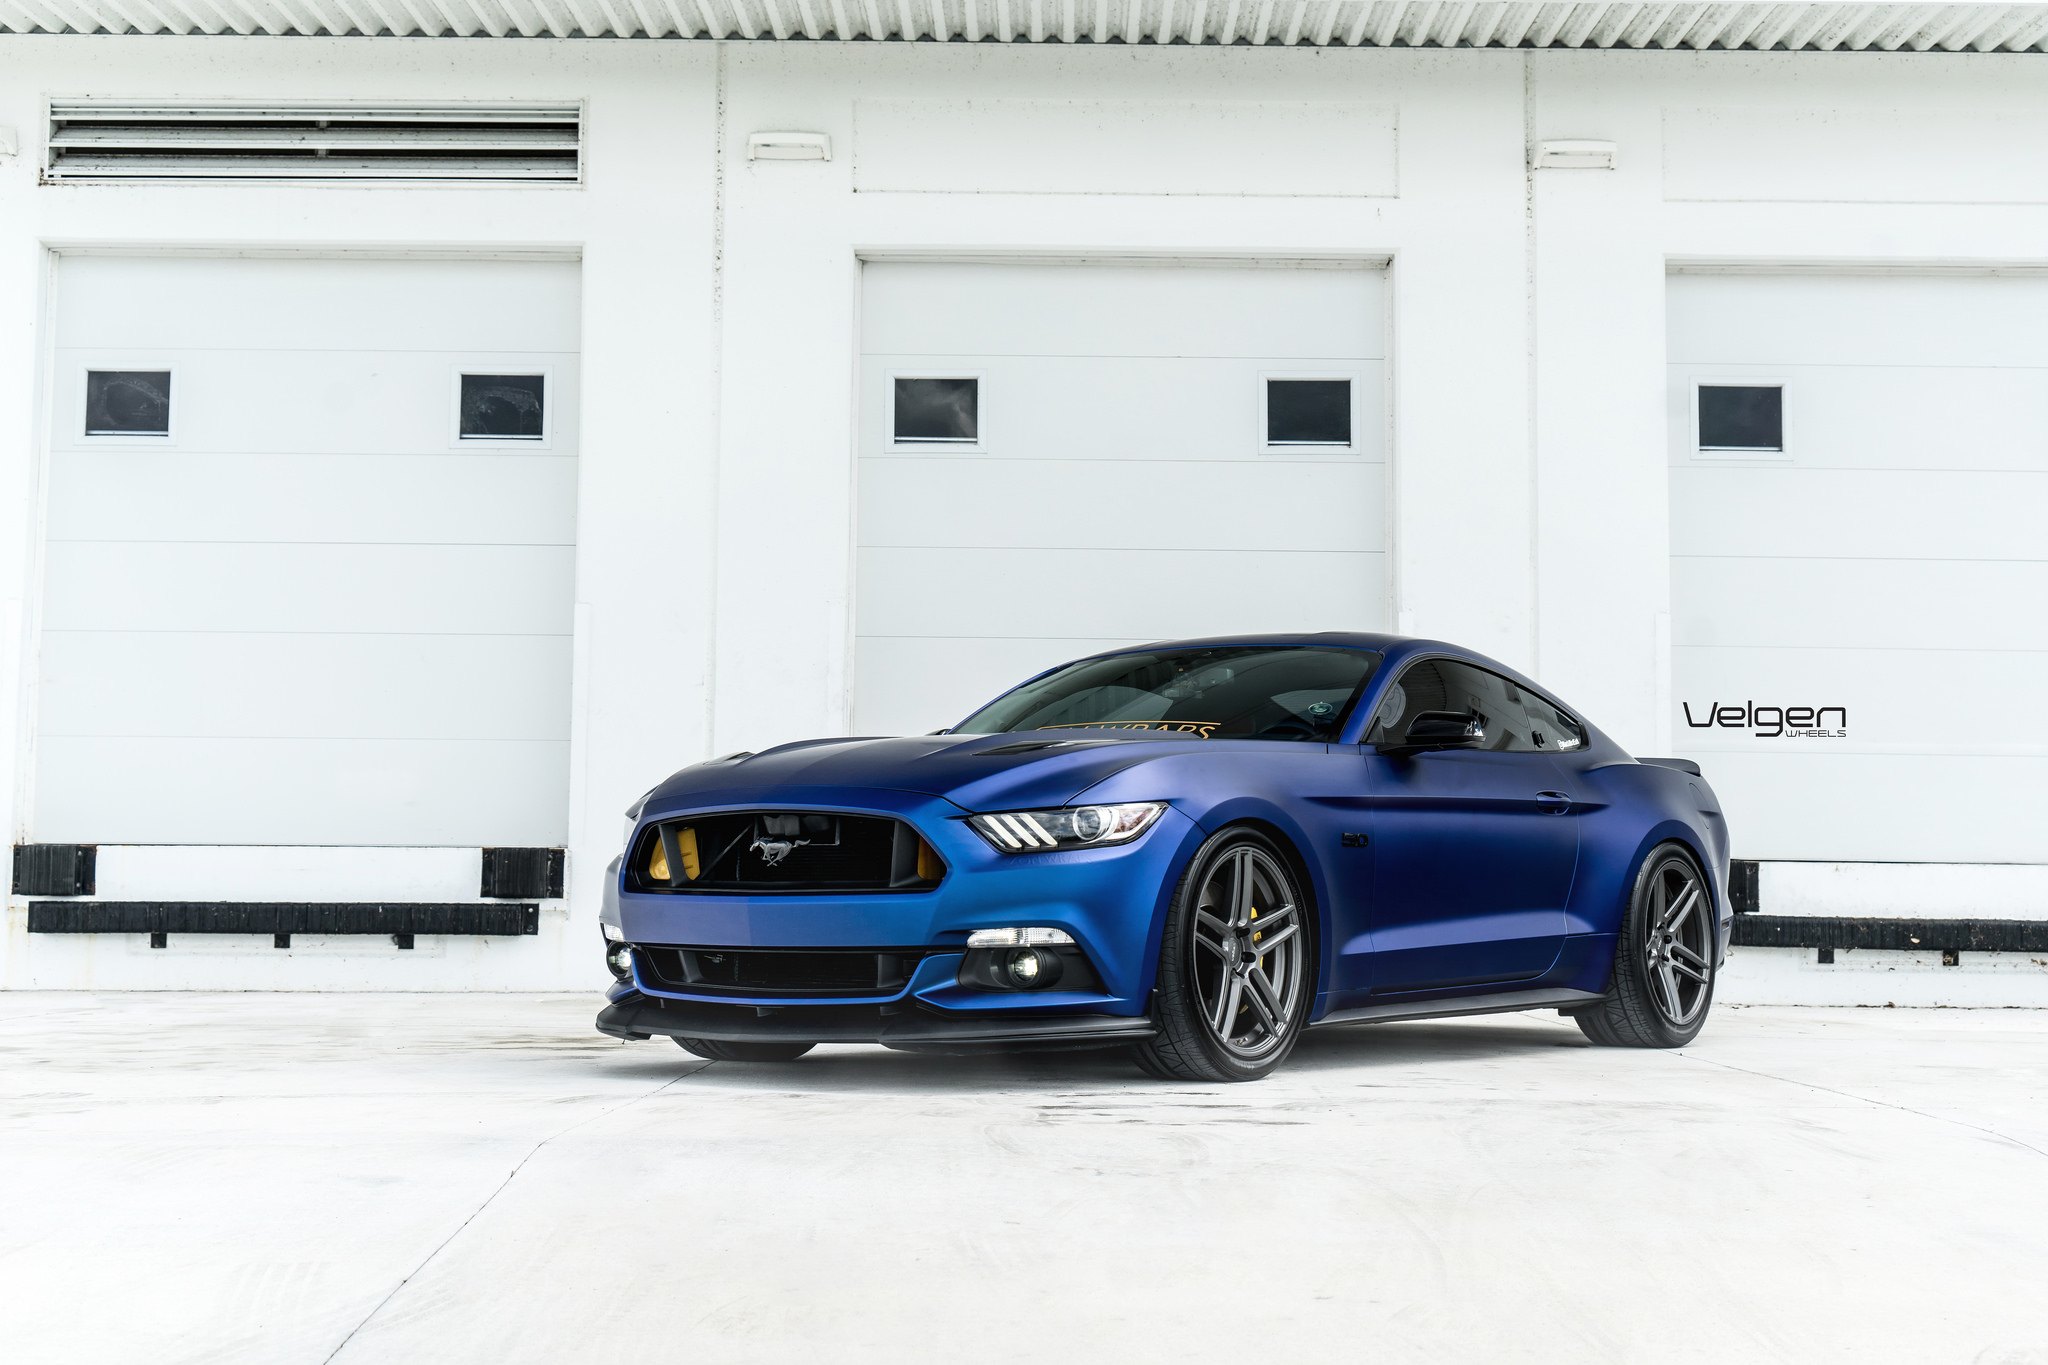 Custom Hood with Air Vents on Blue Ford Mustang - Photo by Velgen